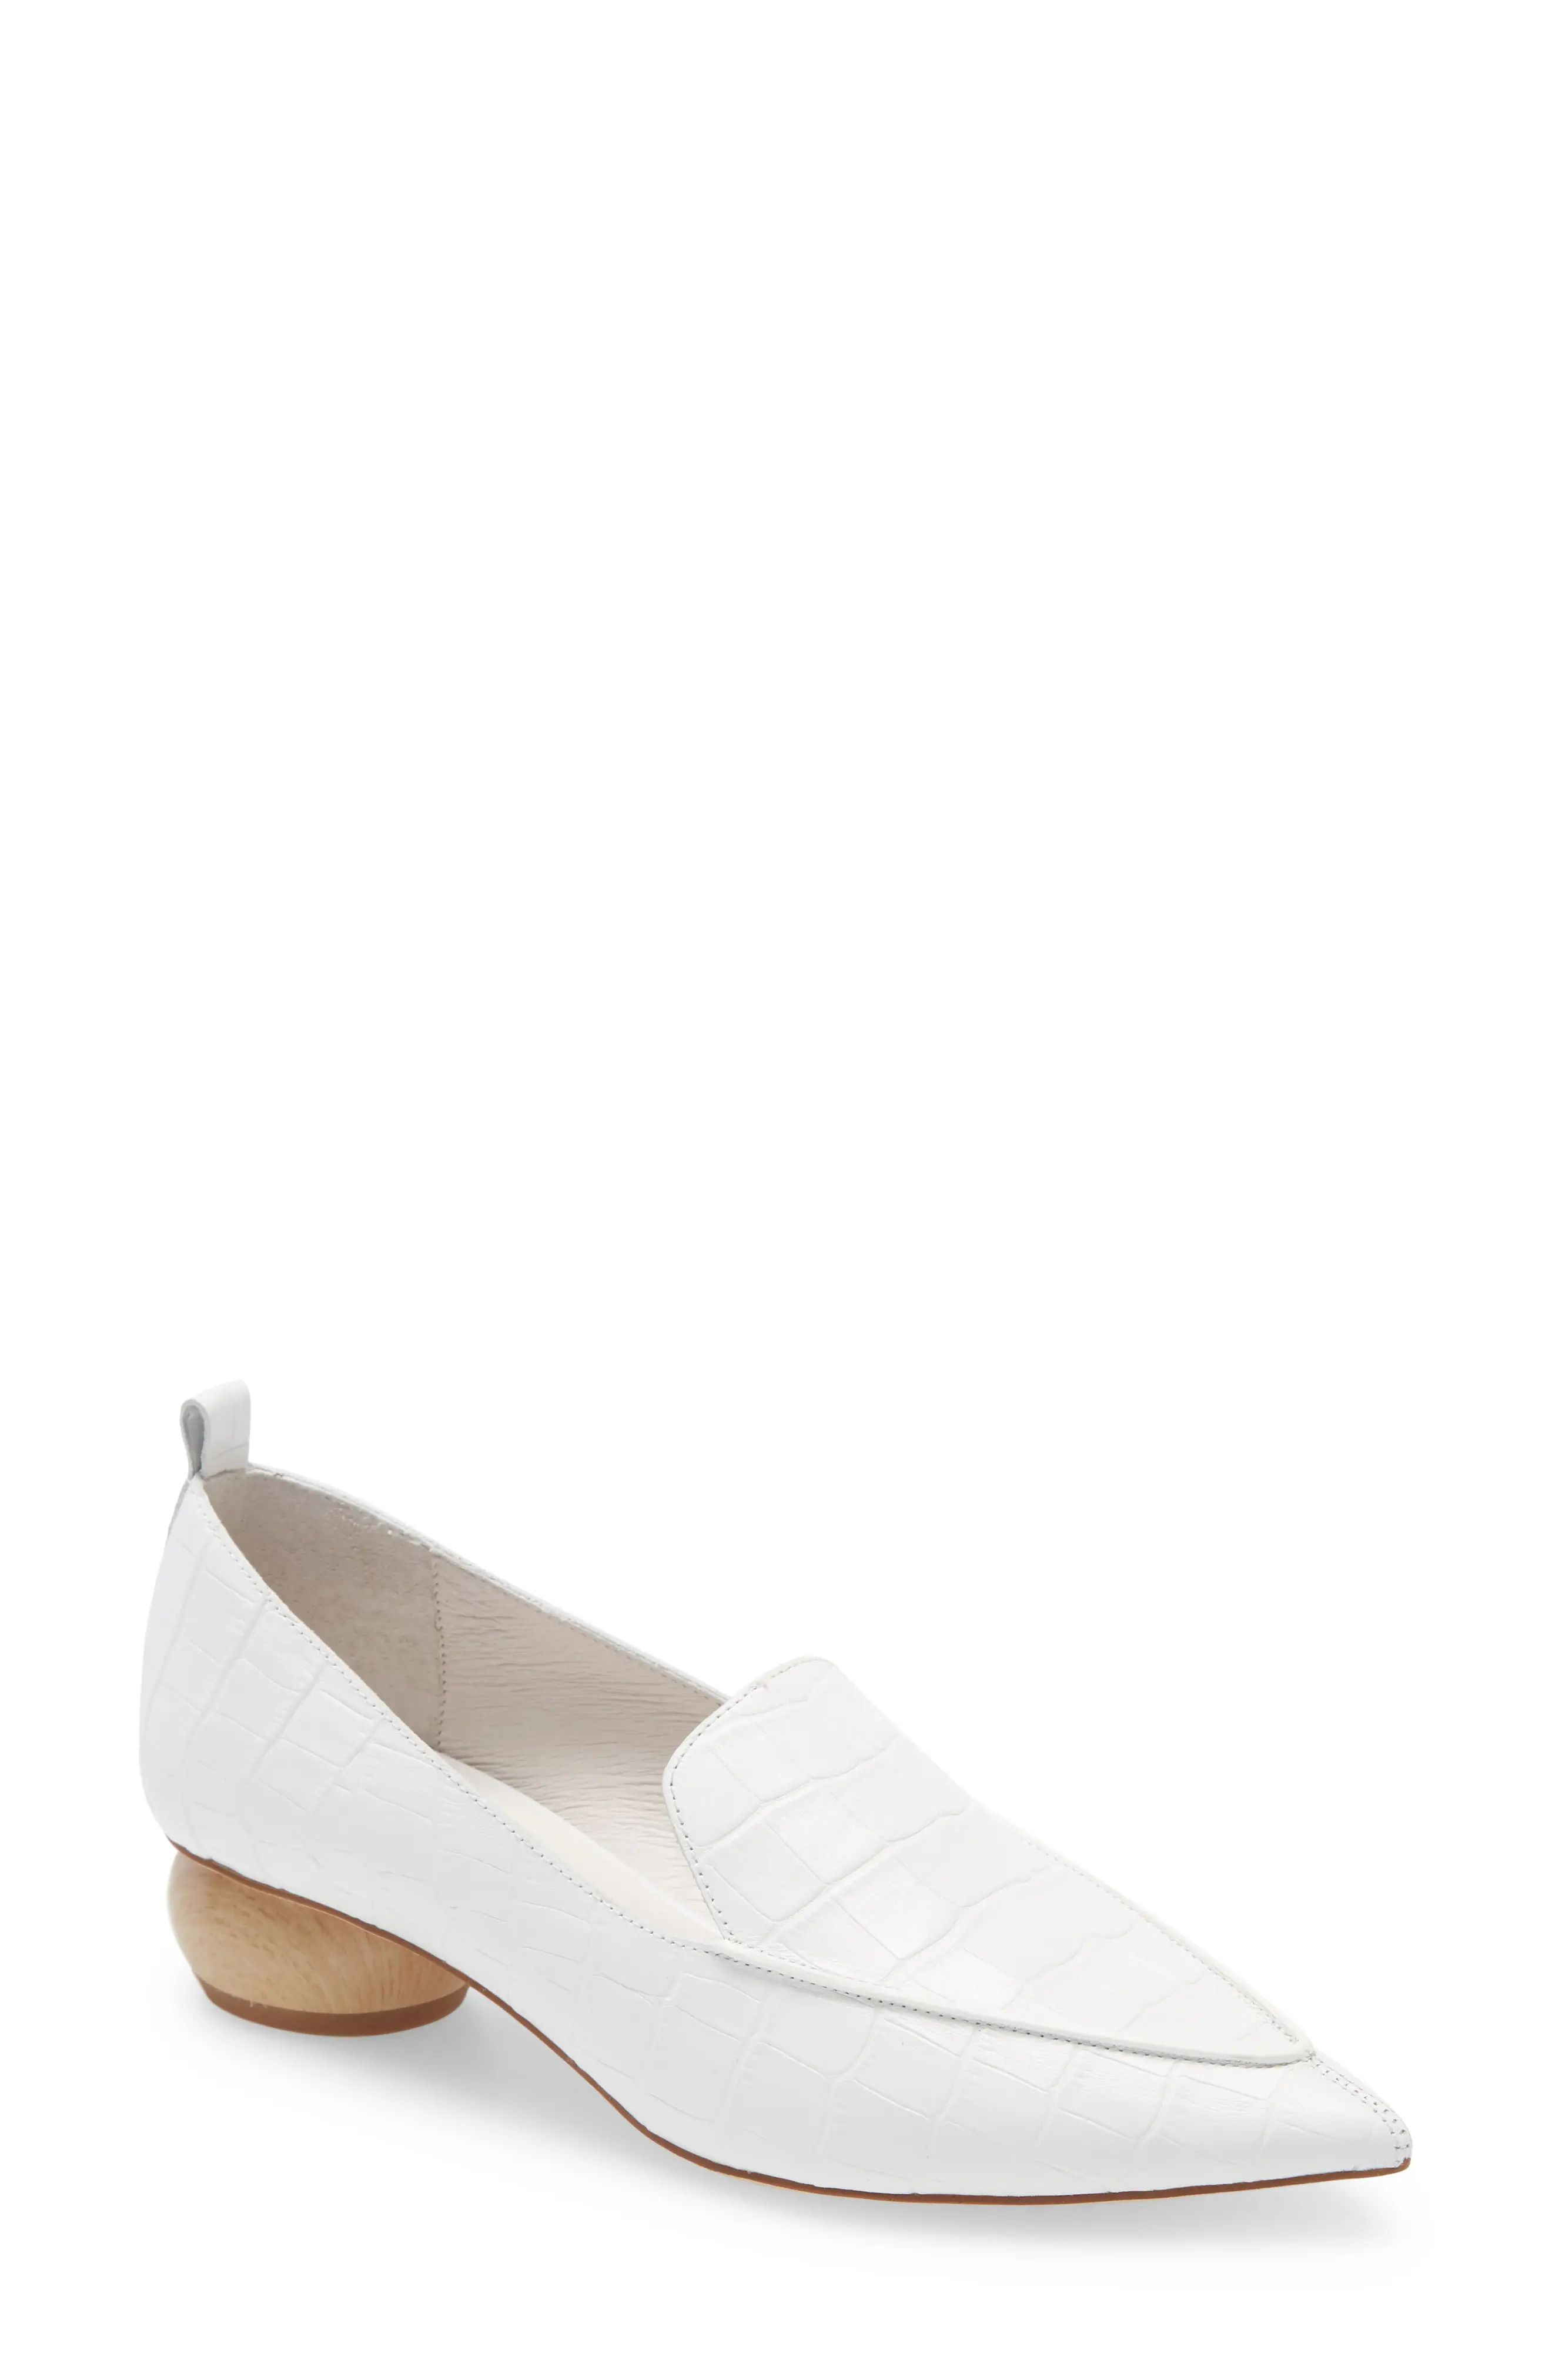 Women's Jeffrey Campbell Viona Loafer, Size 7 M - White | Nordstrom